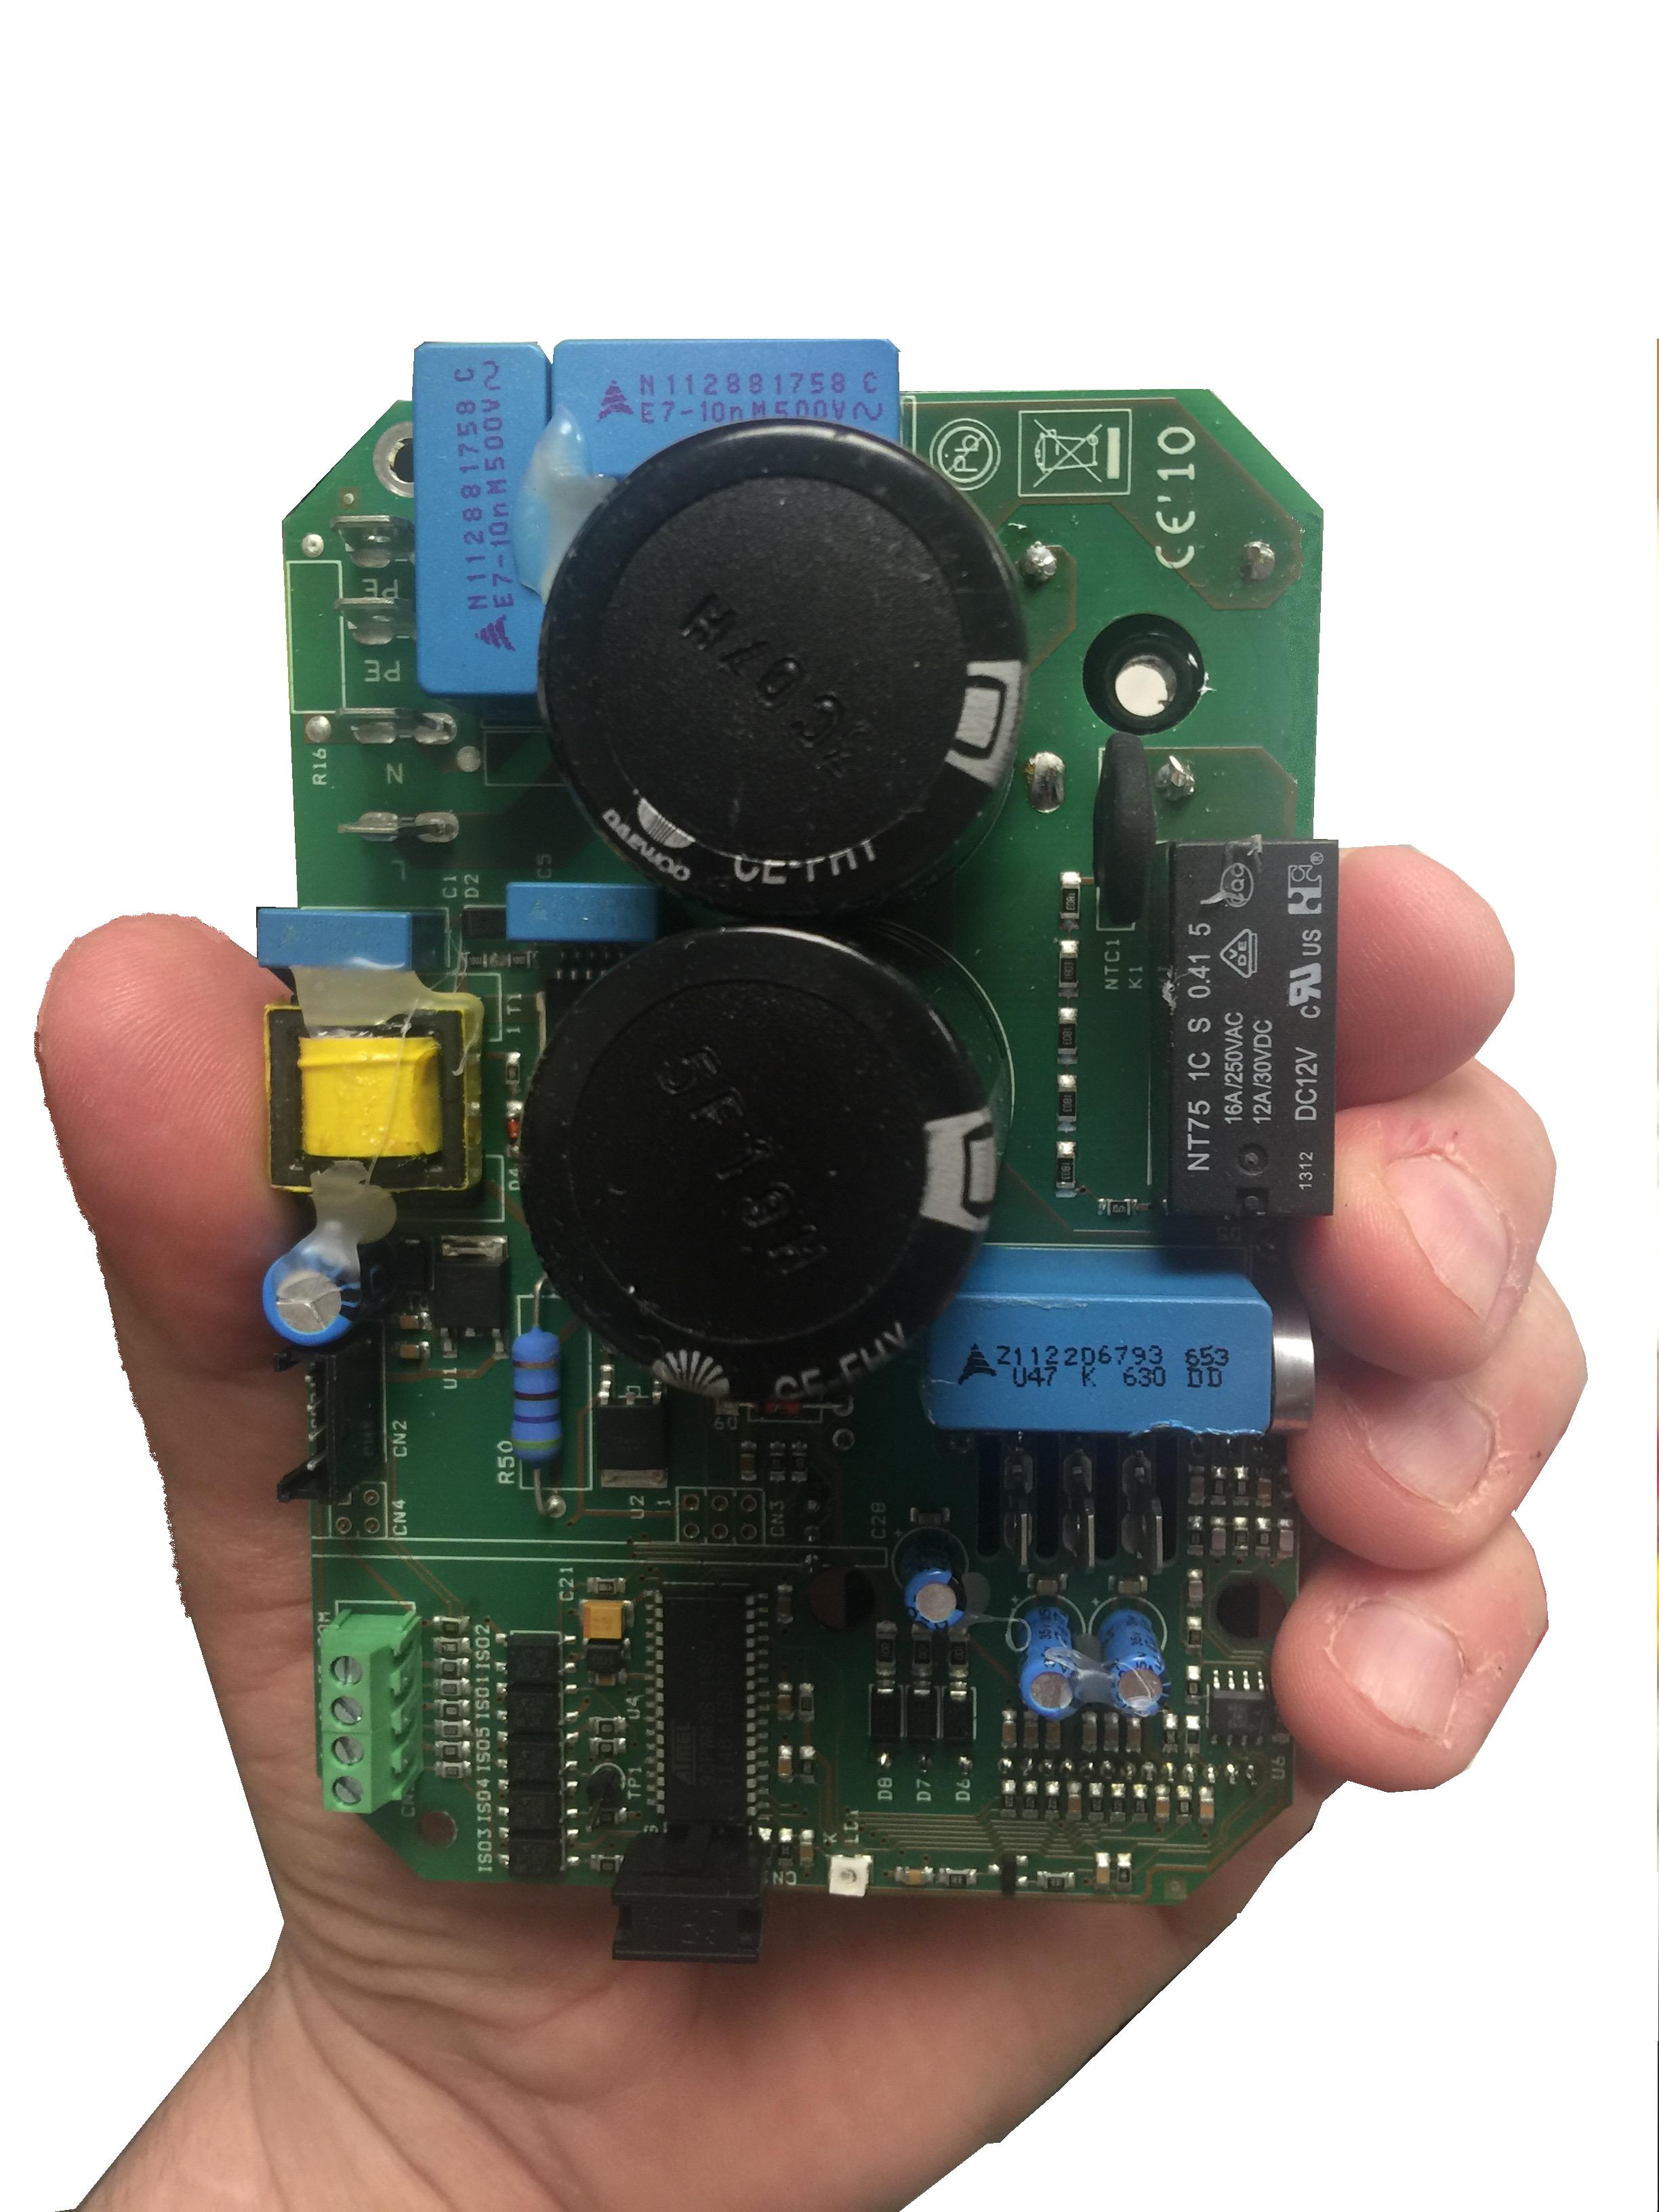 Smart Motor with hand for size compareson 